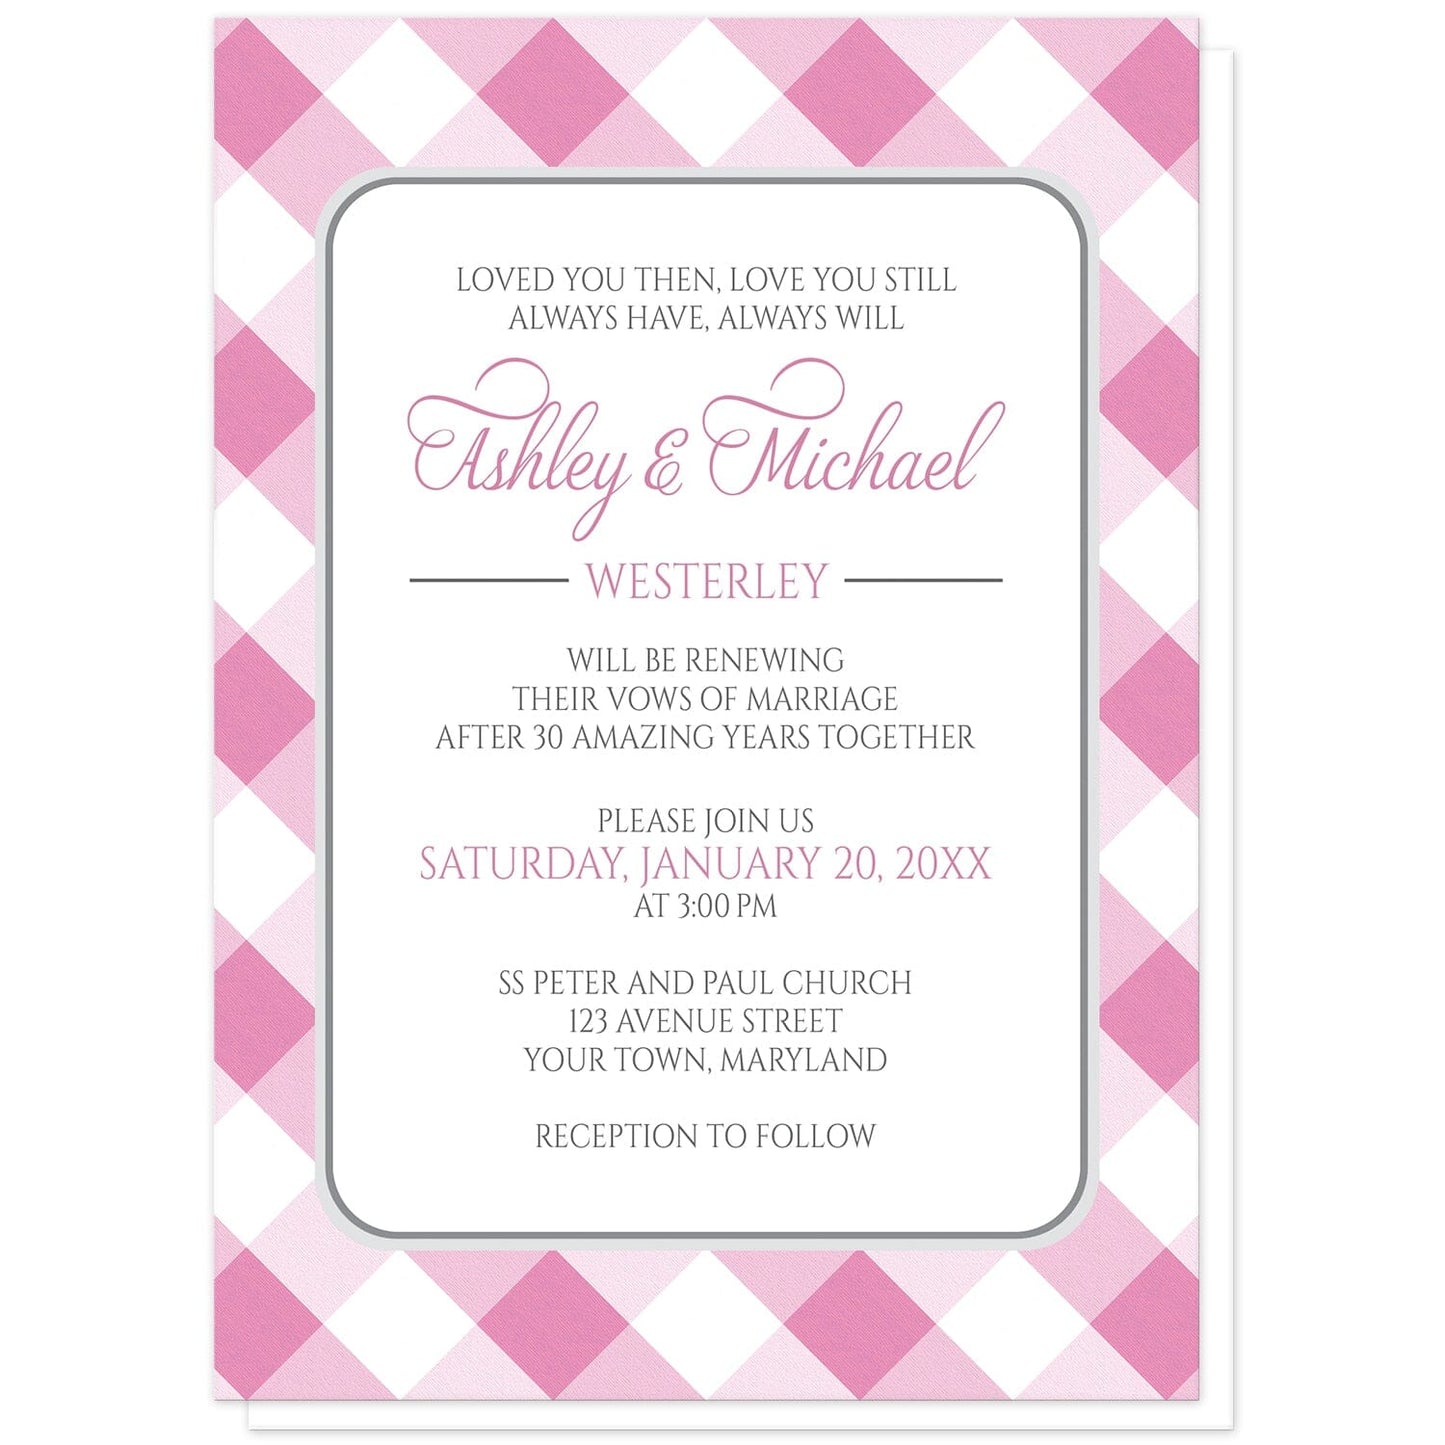 Pink Gingham Vow Renewal Invitations at Artistically Invited. Pink gingham vow renewal invitations with your personalized ceremony details custom printed in pink and gray inside a white rectangular area outlined in gray. The background design is a diagonal pink and white gingham pattern. 